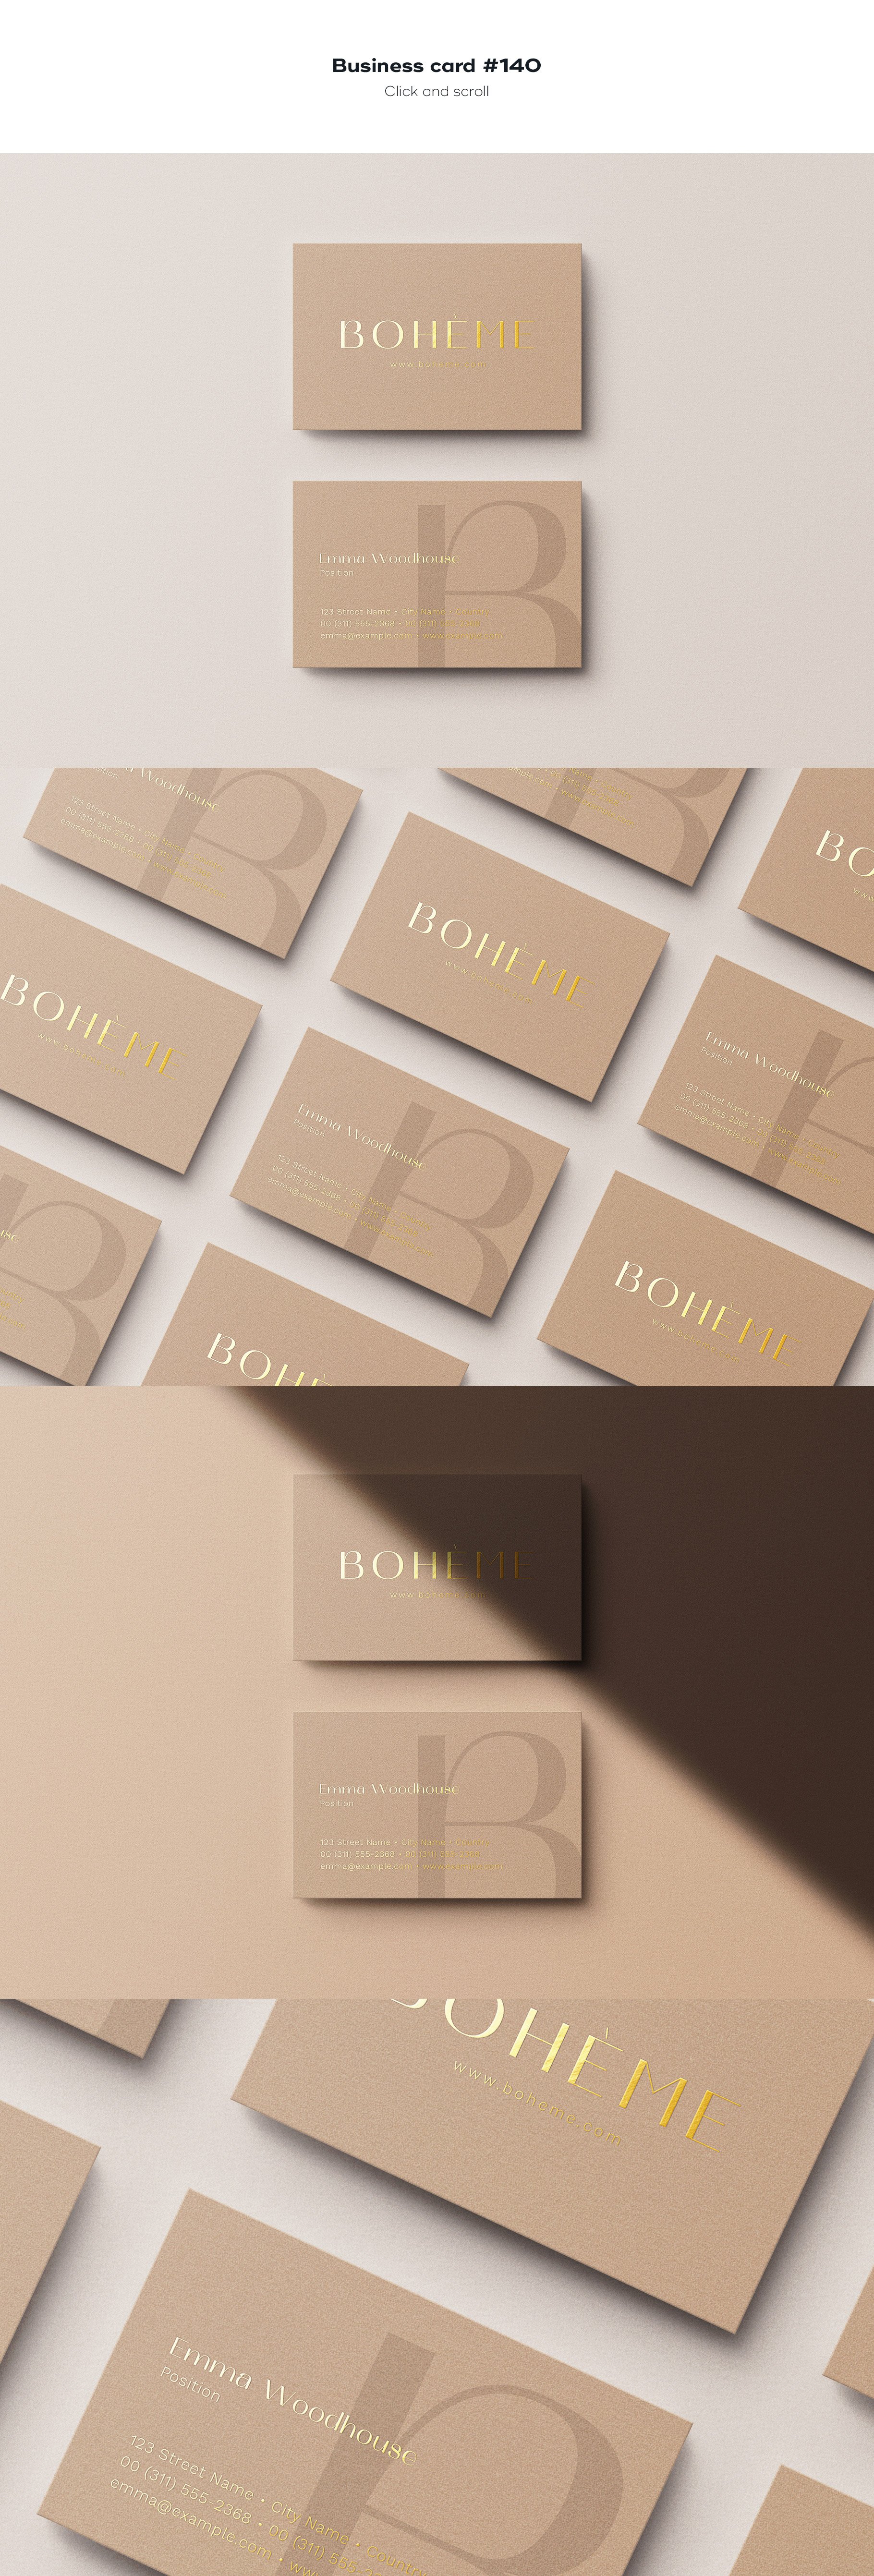 business card 140 966